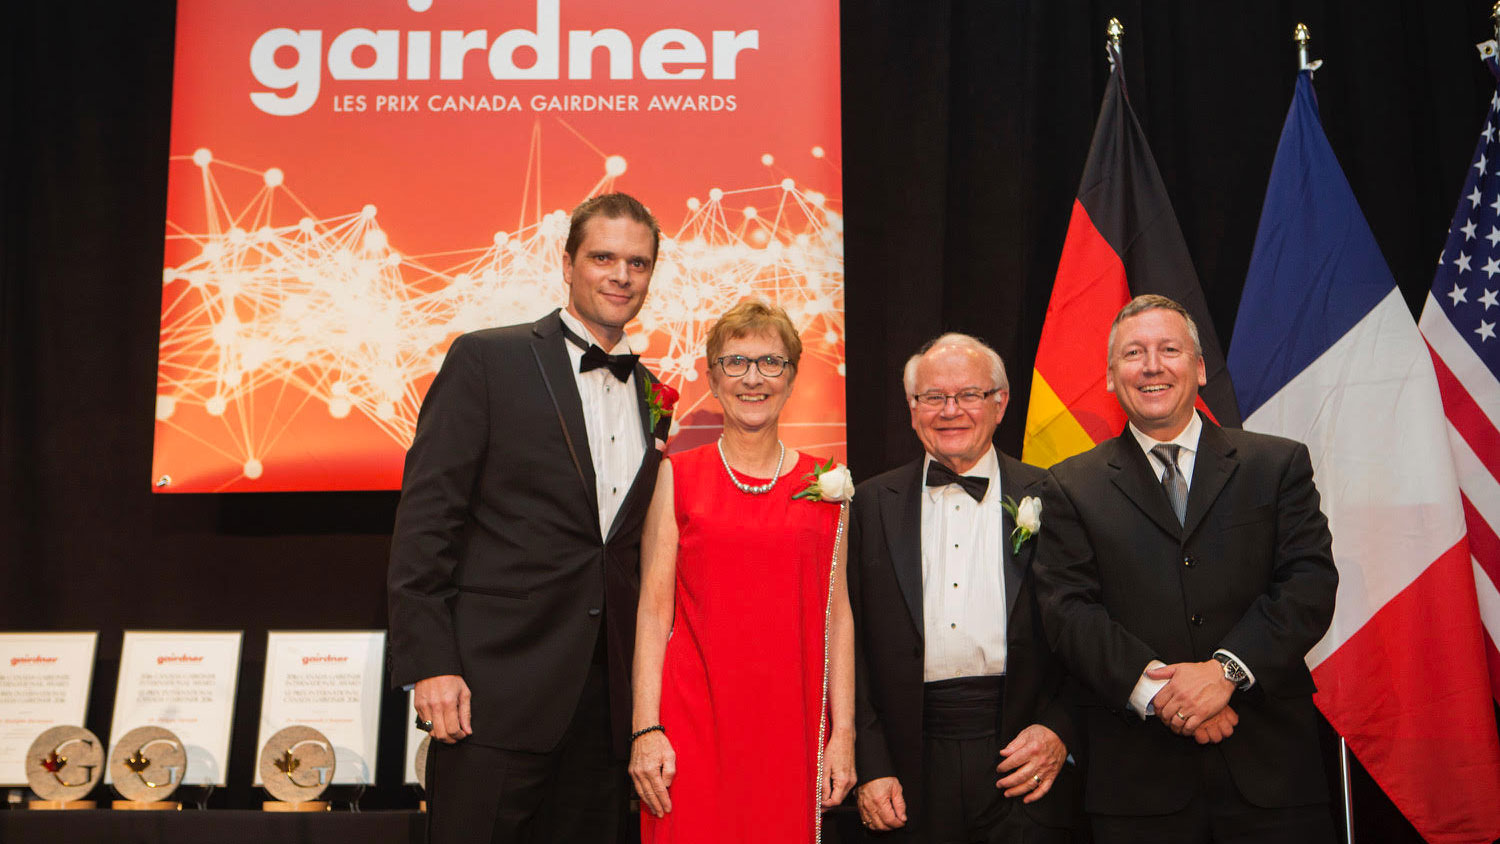 Dr. Rodolphe Barrangou with Dr. Janet Rossantand, Gairdner president and scientific director; Dr. Lorne Tyrrell, chair of the Gairdner board of directors; and CALS Dean Richard Linton at the award ceremony in Toronto.